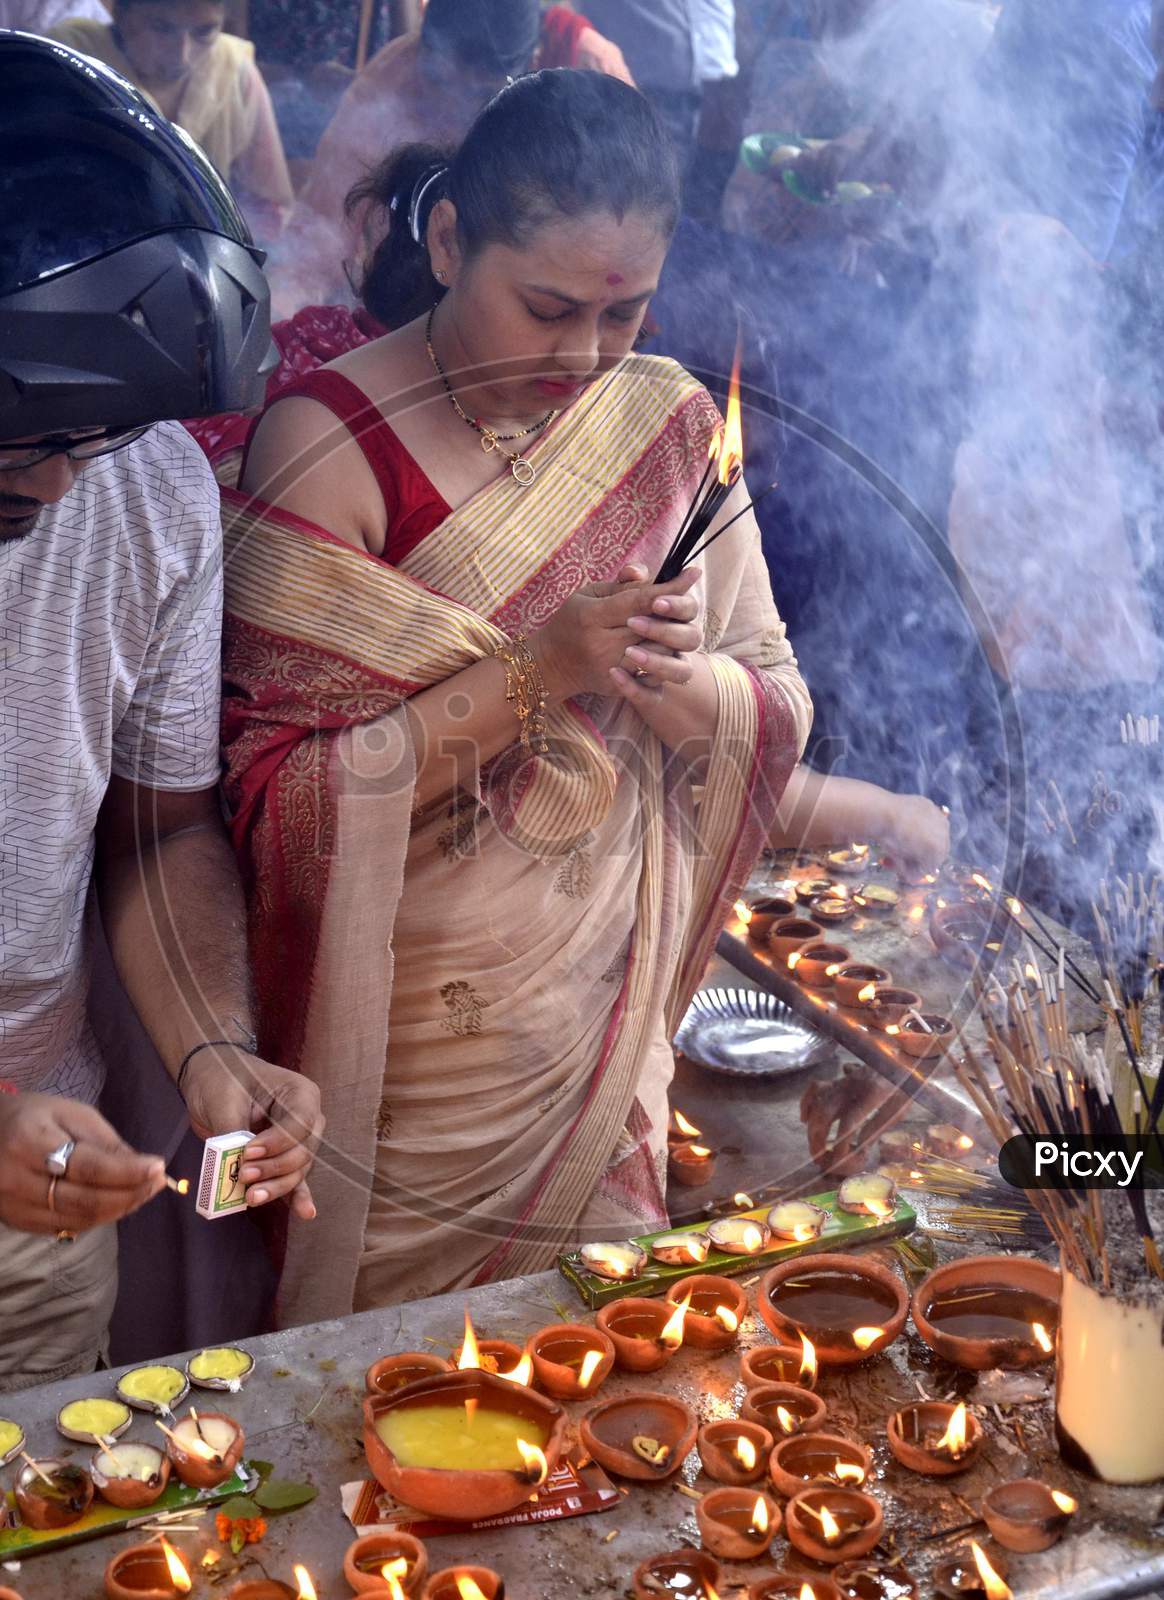 Devotees lighting  the earthen lamp to offer prayers to Lord Ganesha